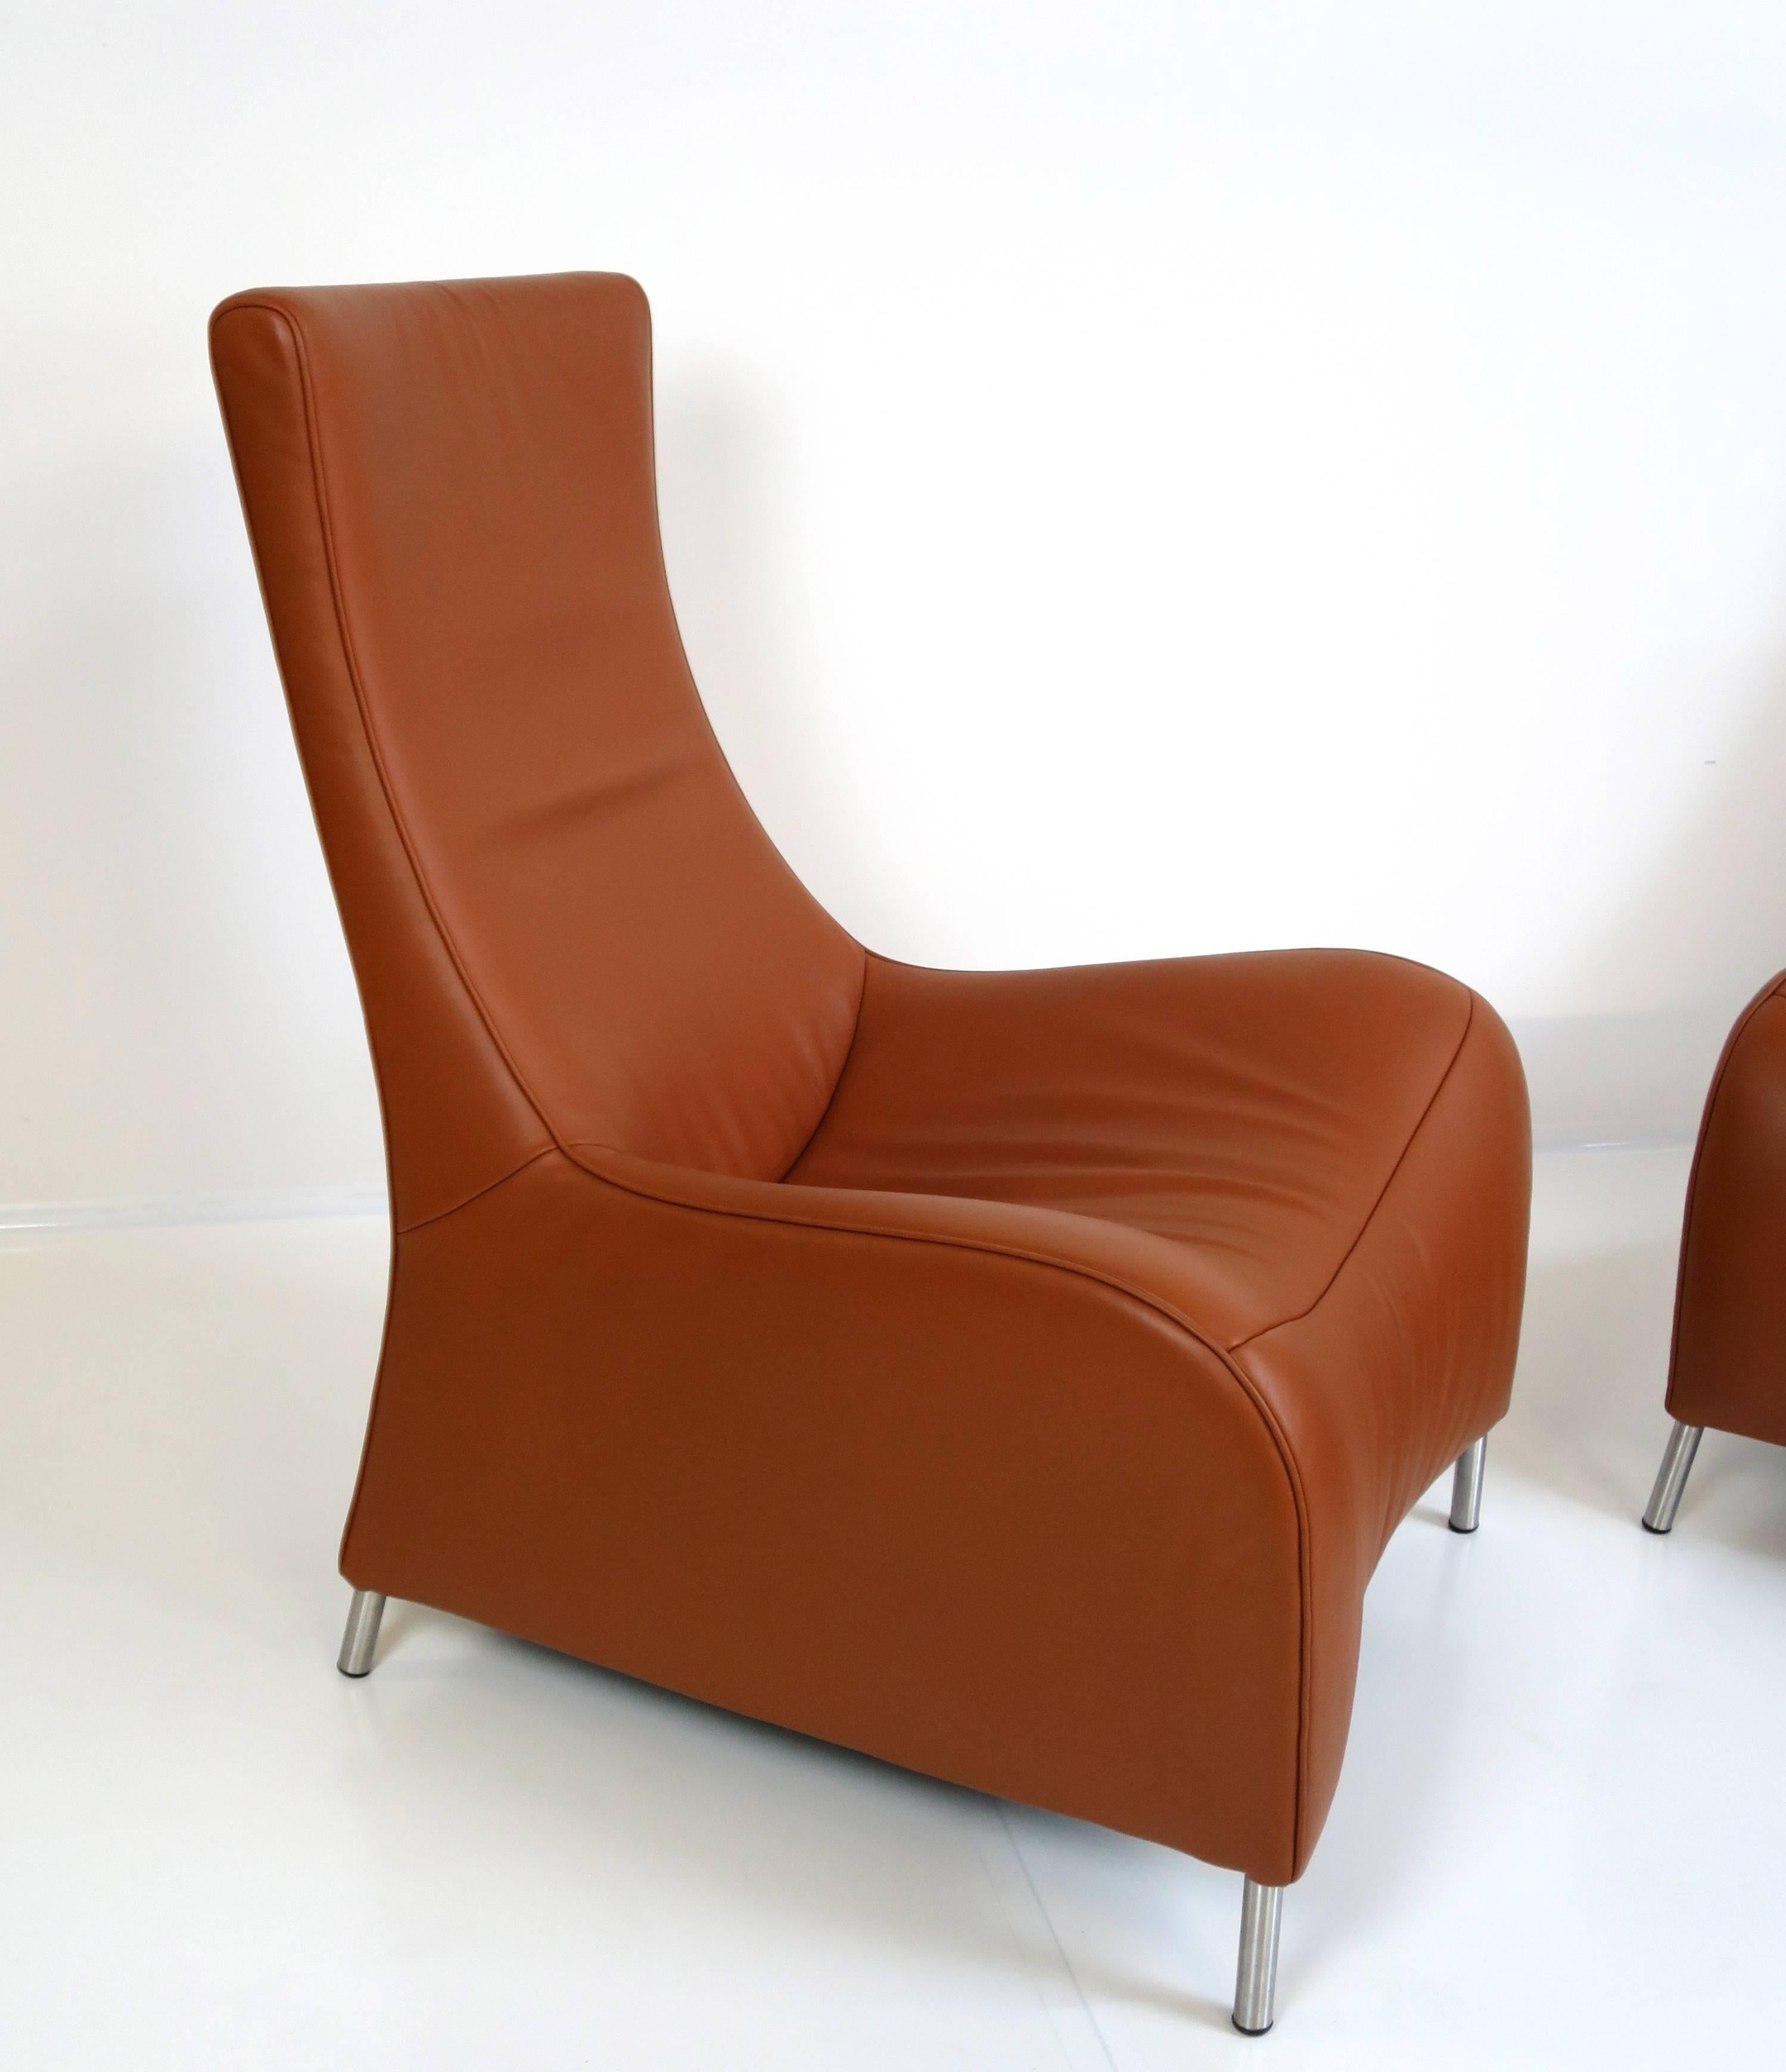 Late 20th Century Pair of De Sede DS 264 High Back Lounge Chairs by Matthias Hoffmann For Sale